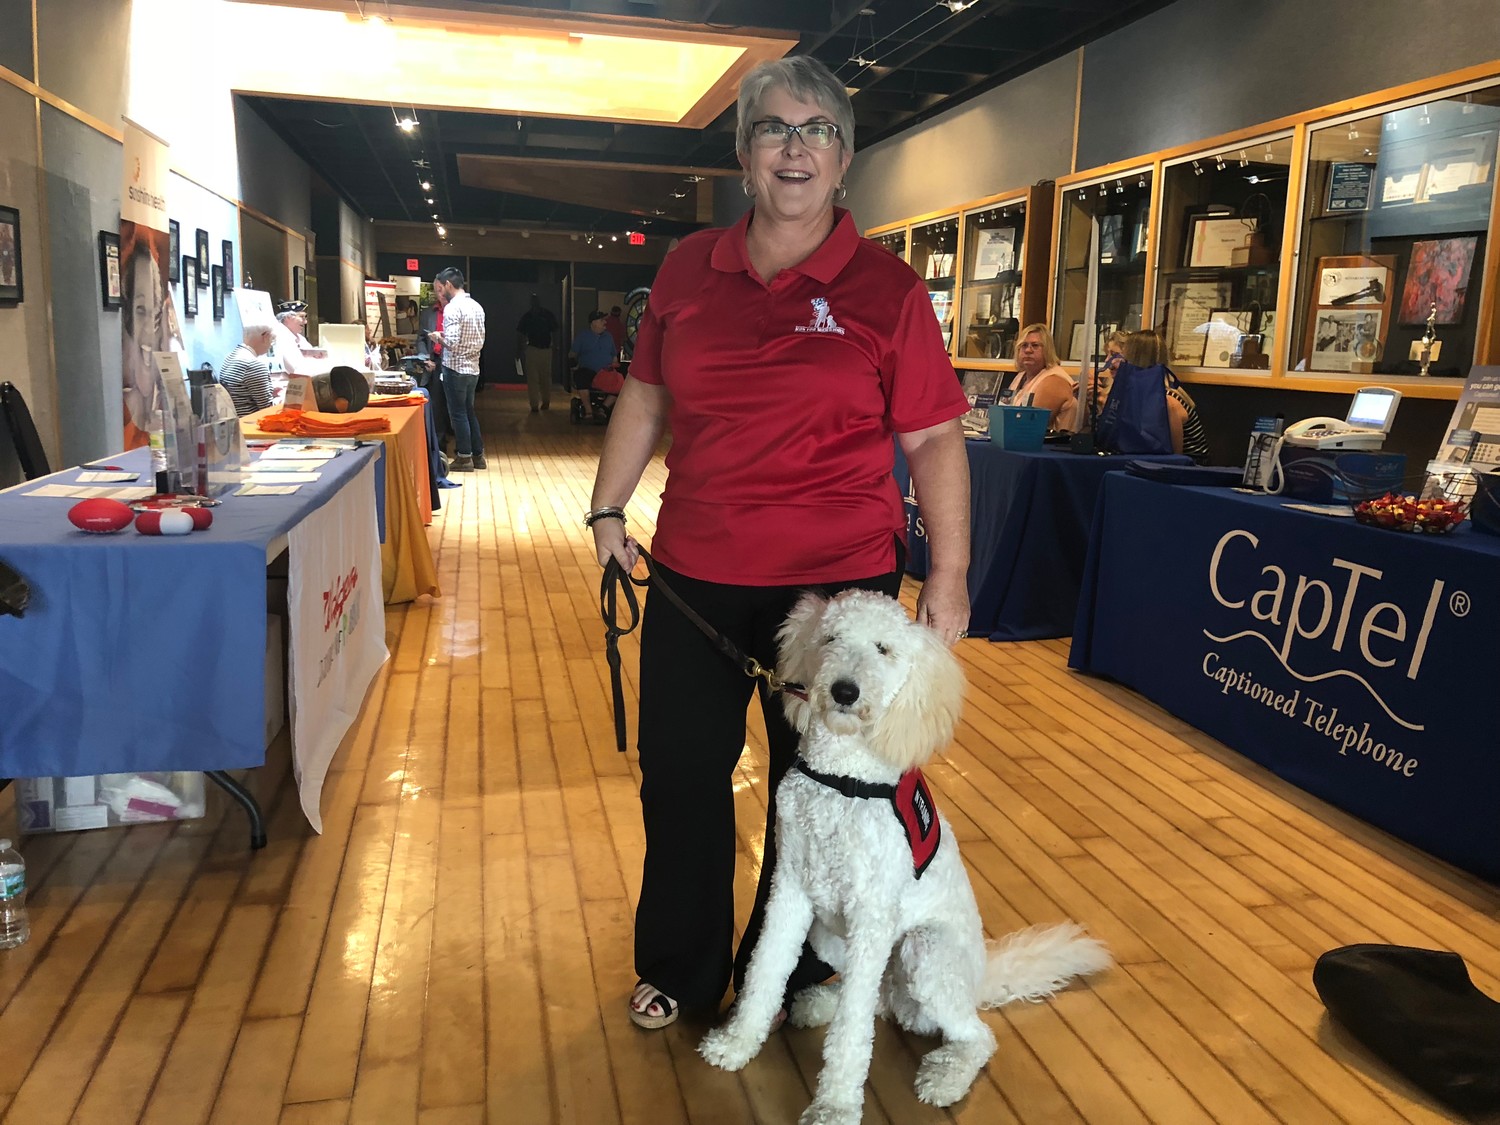 Conference guest Mary Daniel is accompanied by her faithful service animal.